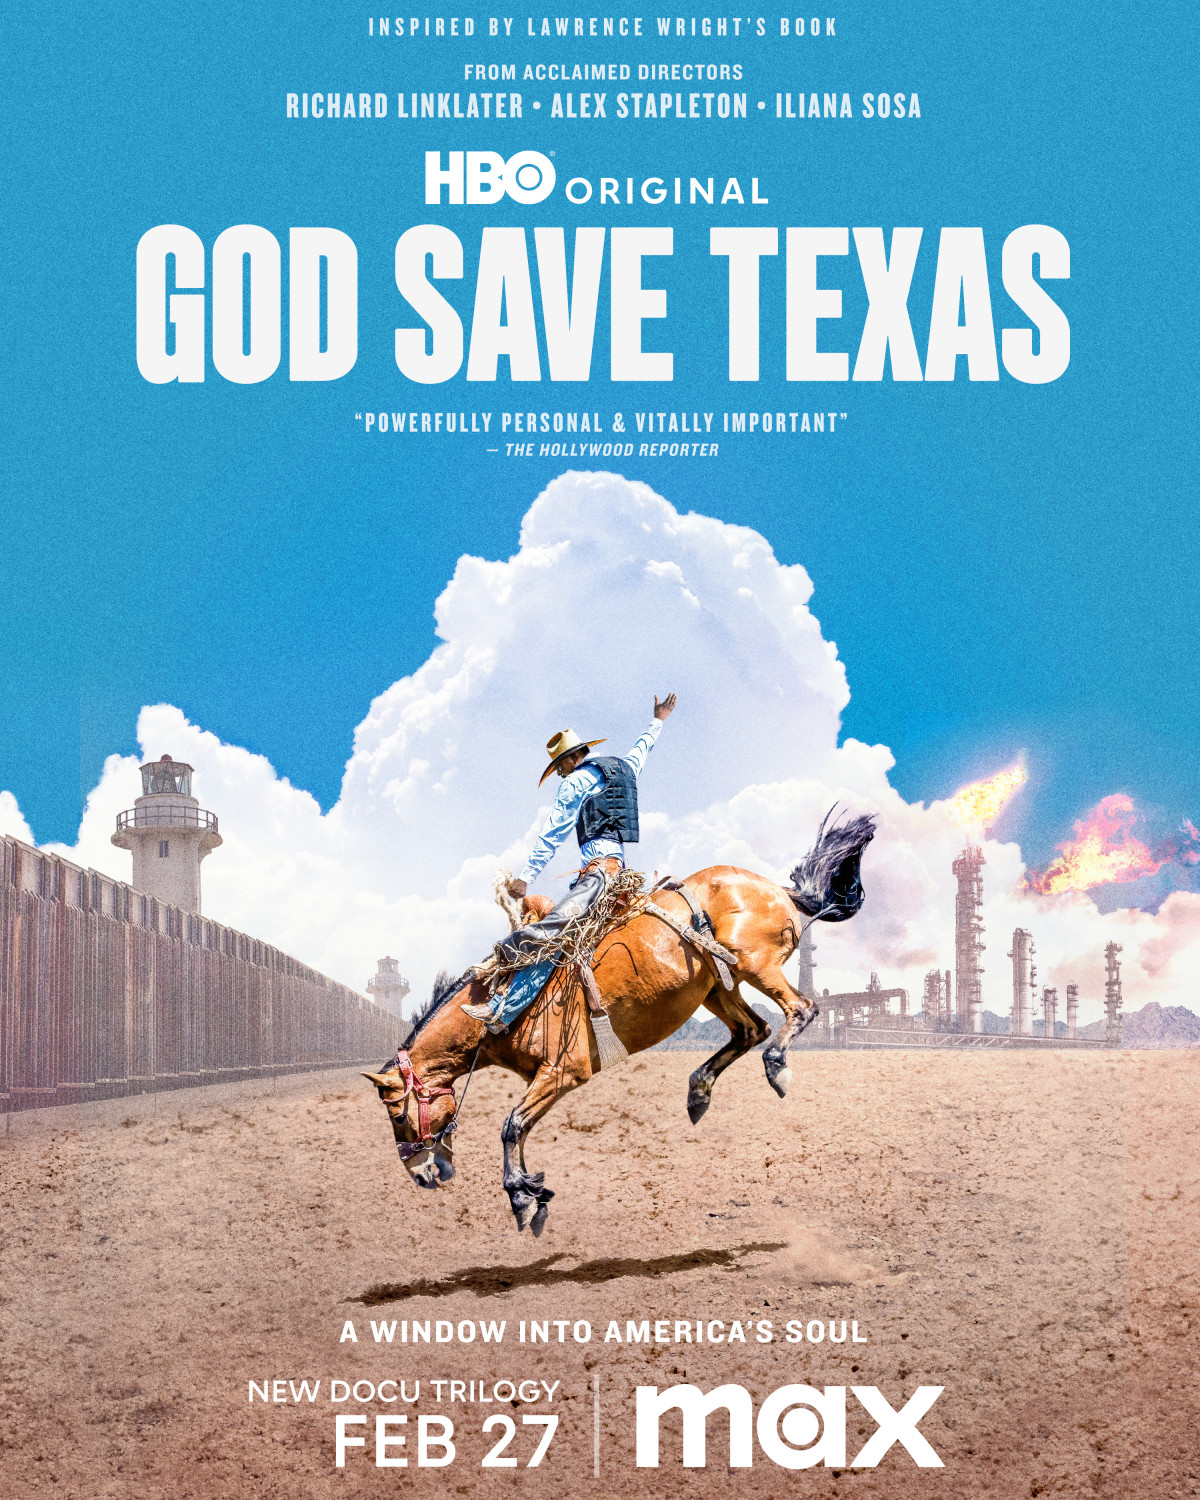 Poster for God Save Texas HBO Docuseries